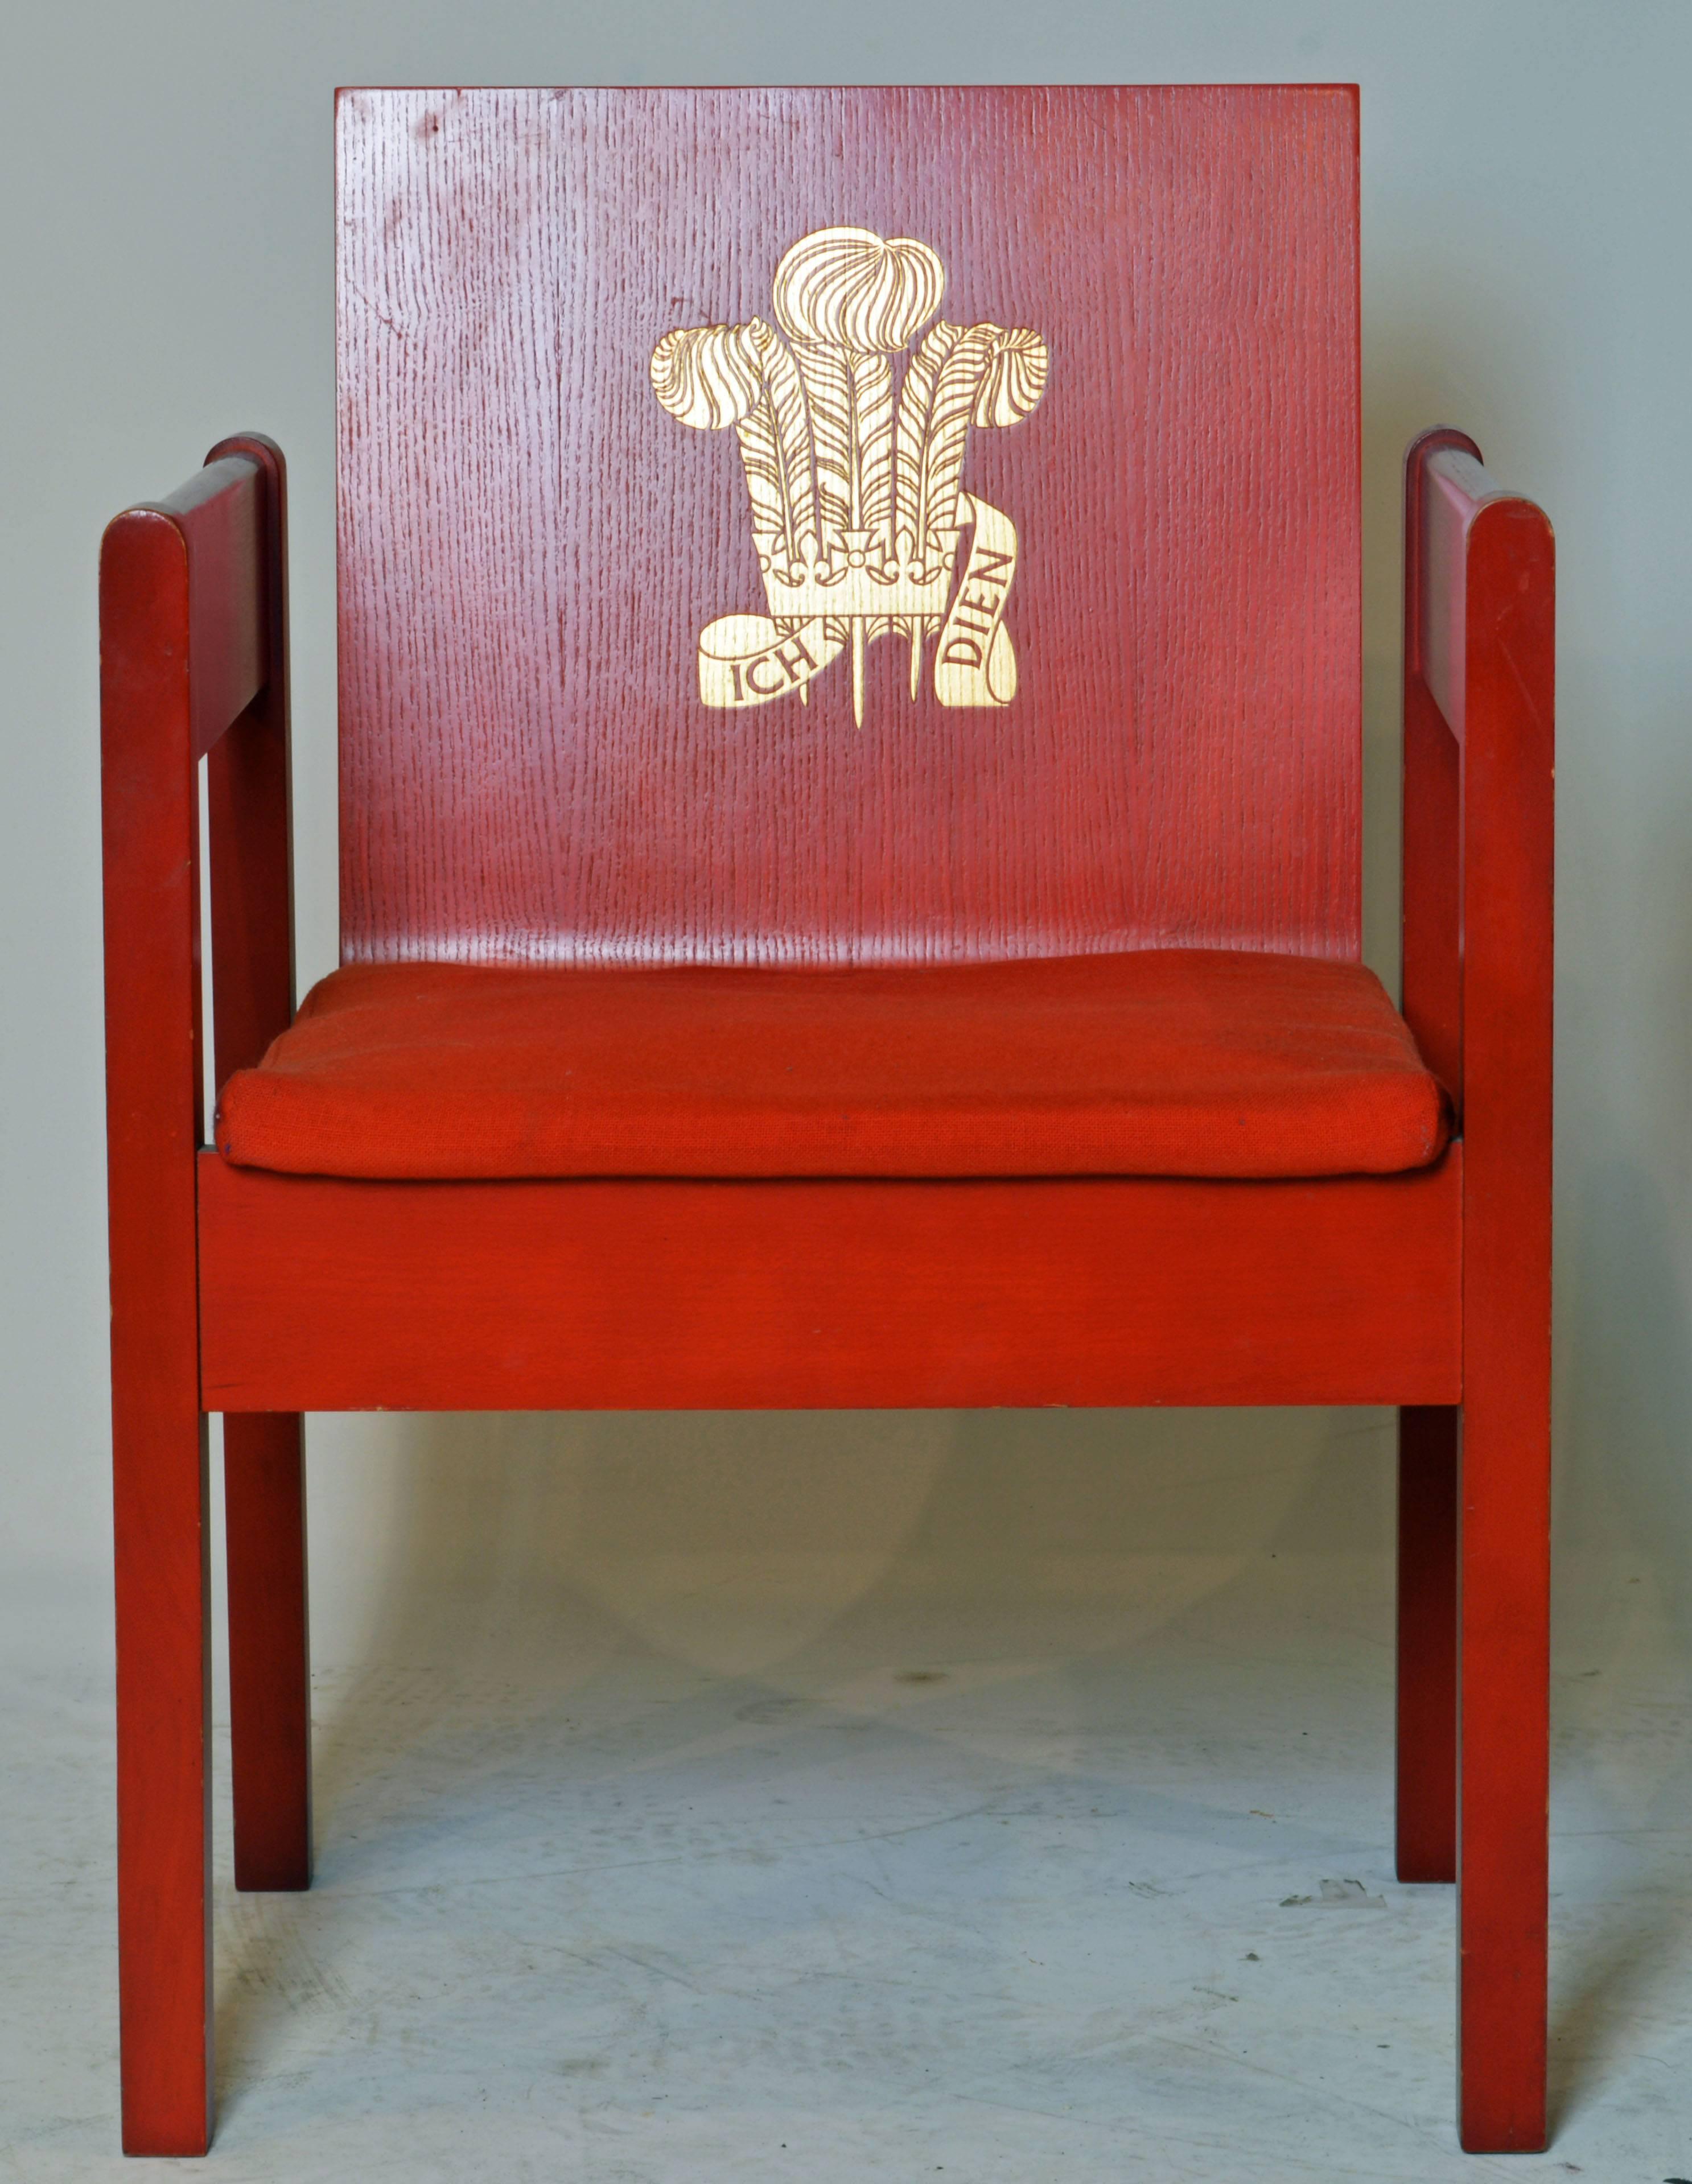 A Prince Charles investiture chair designed 1969 by Lord Snowdon (Anthony Armstrong Jones) of laminated ash painted red with slightly indented gilt Prince of Wales feathers and his motto ICH DIEN (I serve). Seat upholstered in red Welsh tweed. W